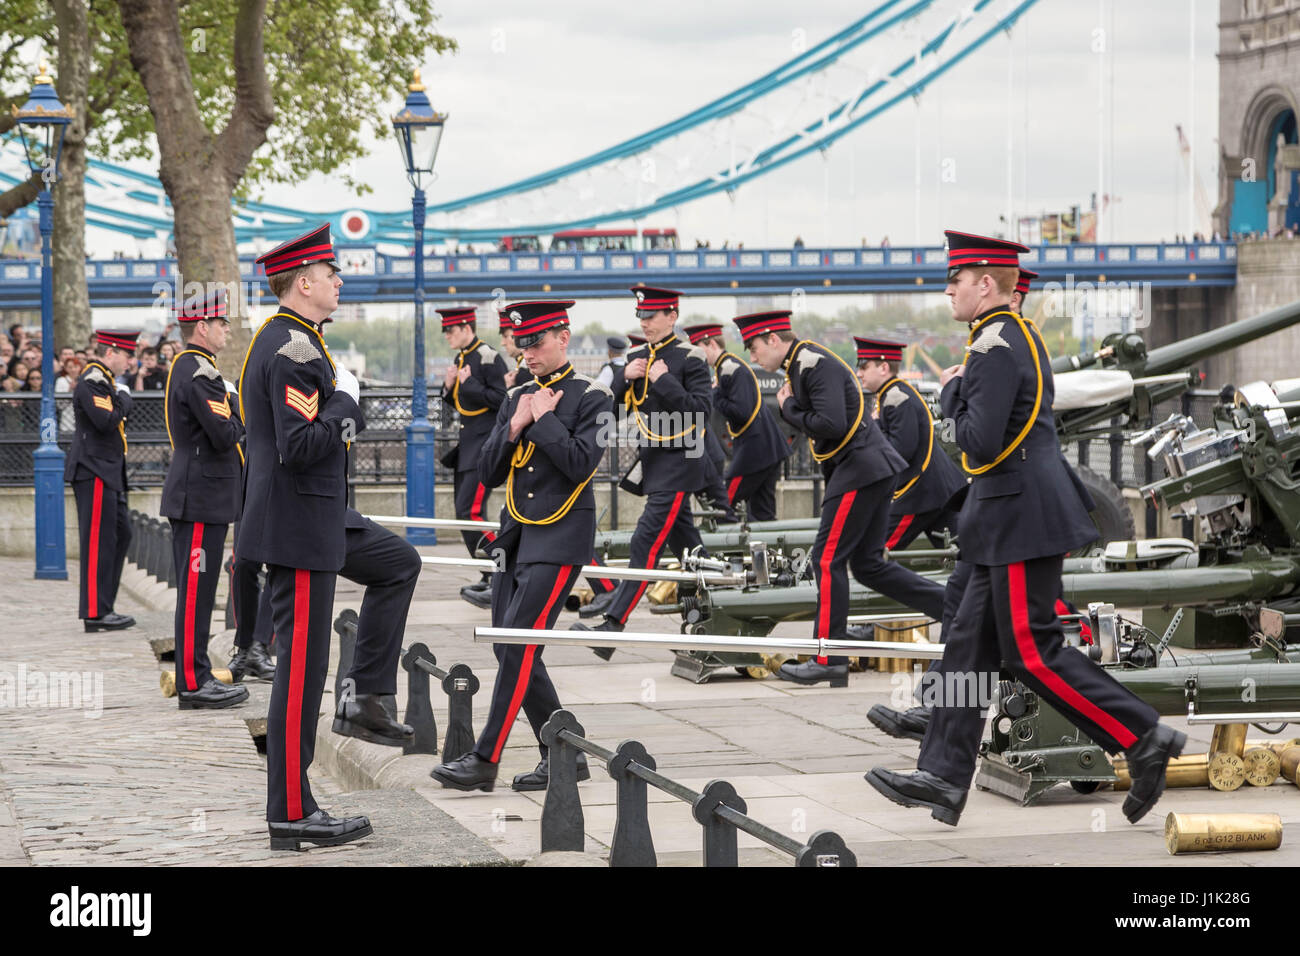 London, UK. 21st April, 2017. 62-gun salute fired by the Honourable Artillery Company at the Tower of London on the occasion of The Queen’s 91st birthday. Credit: Guy Corbishley/Alamy Live News Stock Photo